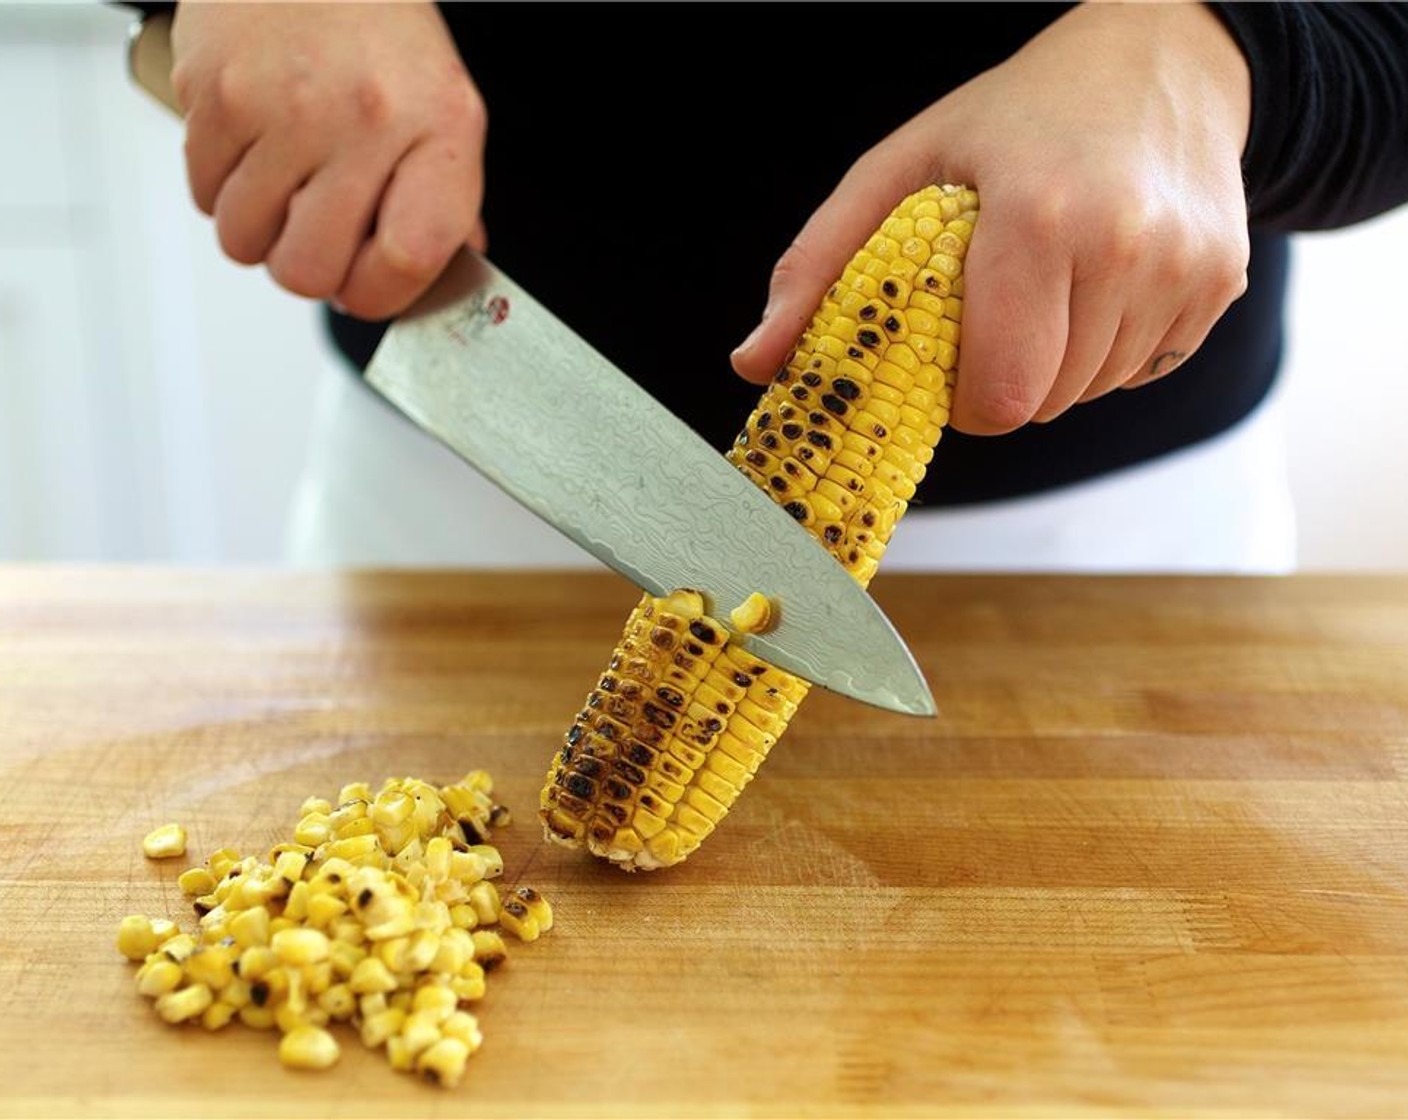 step 10 Place the corn cut side down, on the cutting board, holding it near the top of the ear. Using a sharp knife, start at the top and cut downward with a gentle sawing motion, cutting corn off the cob. Continue cutting until all of the corn is removed.